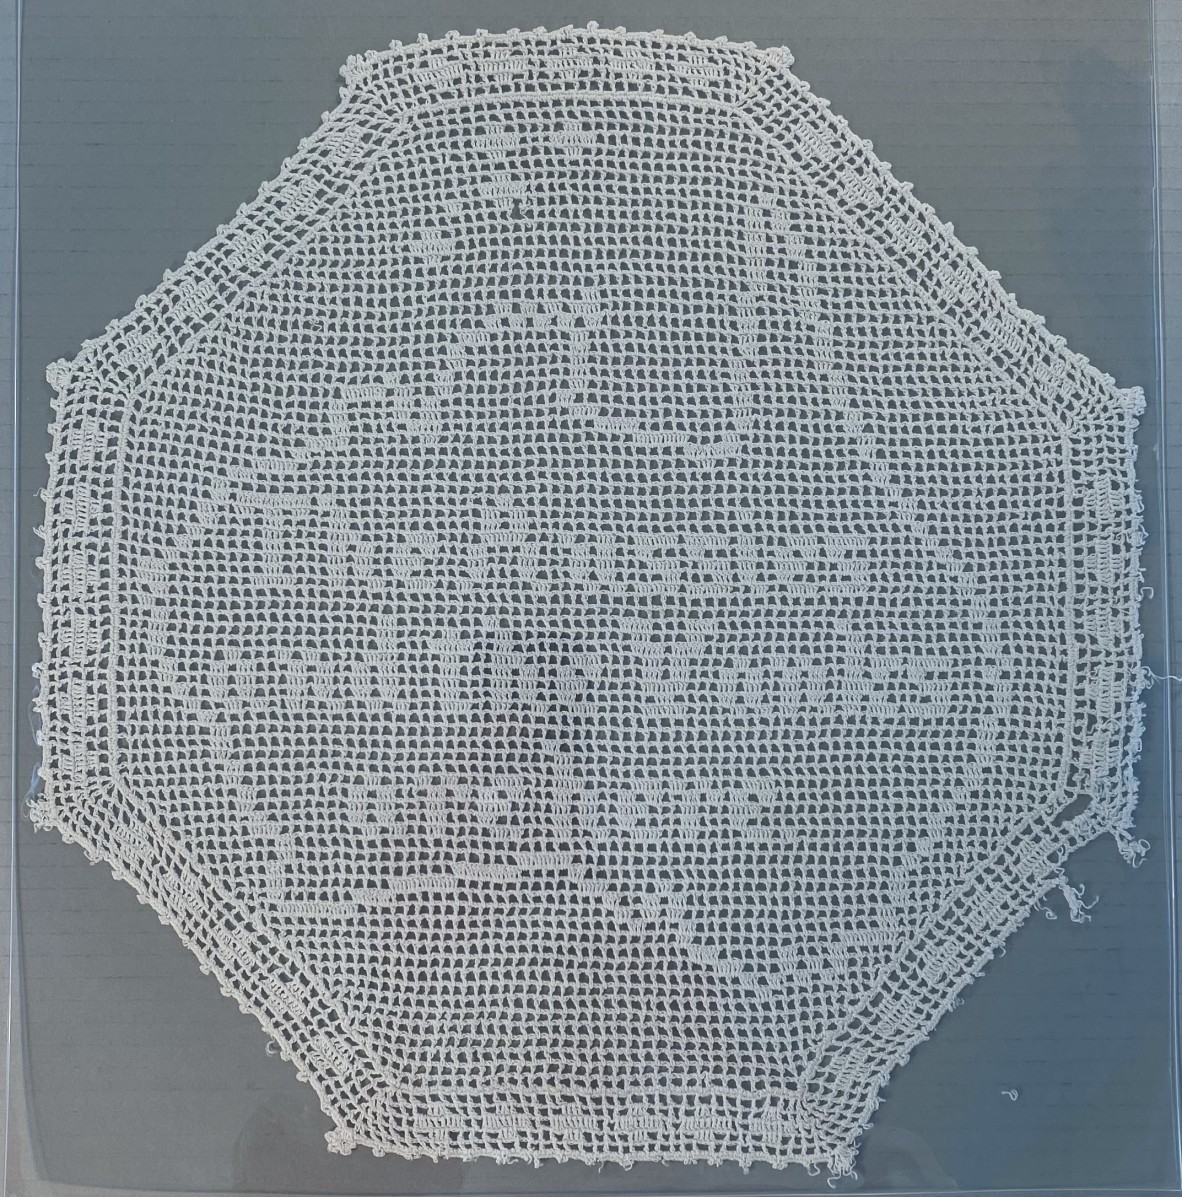 Doily featuring the inscription The Aussies and the Yanks are here